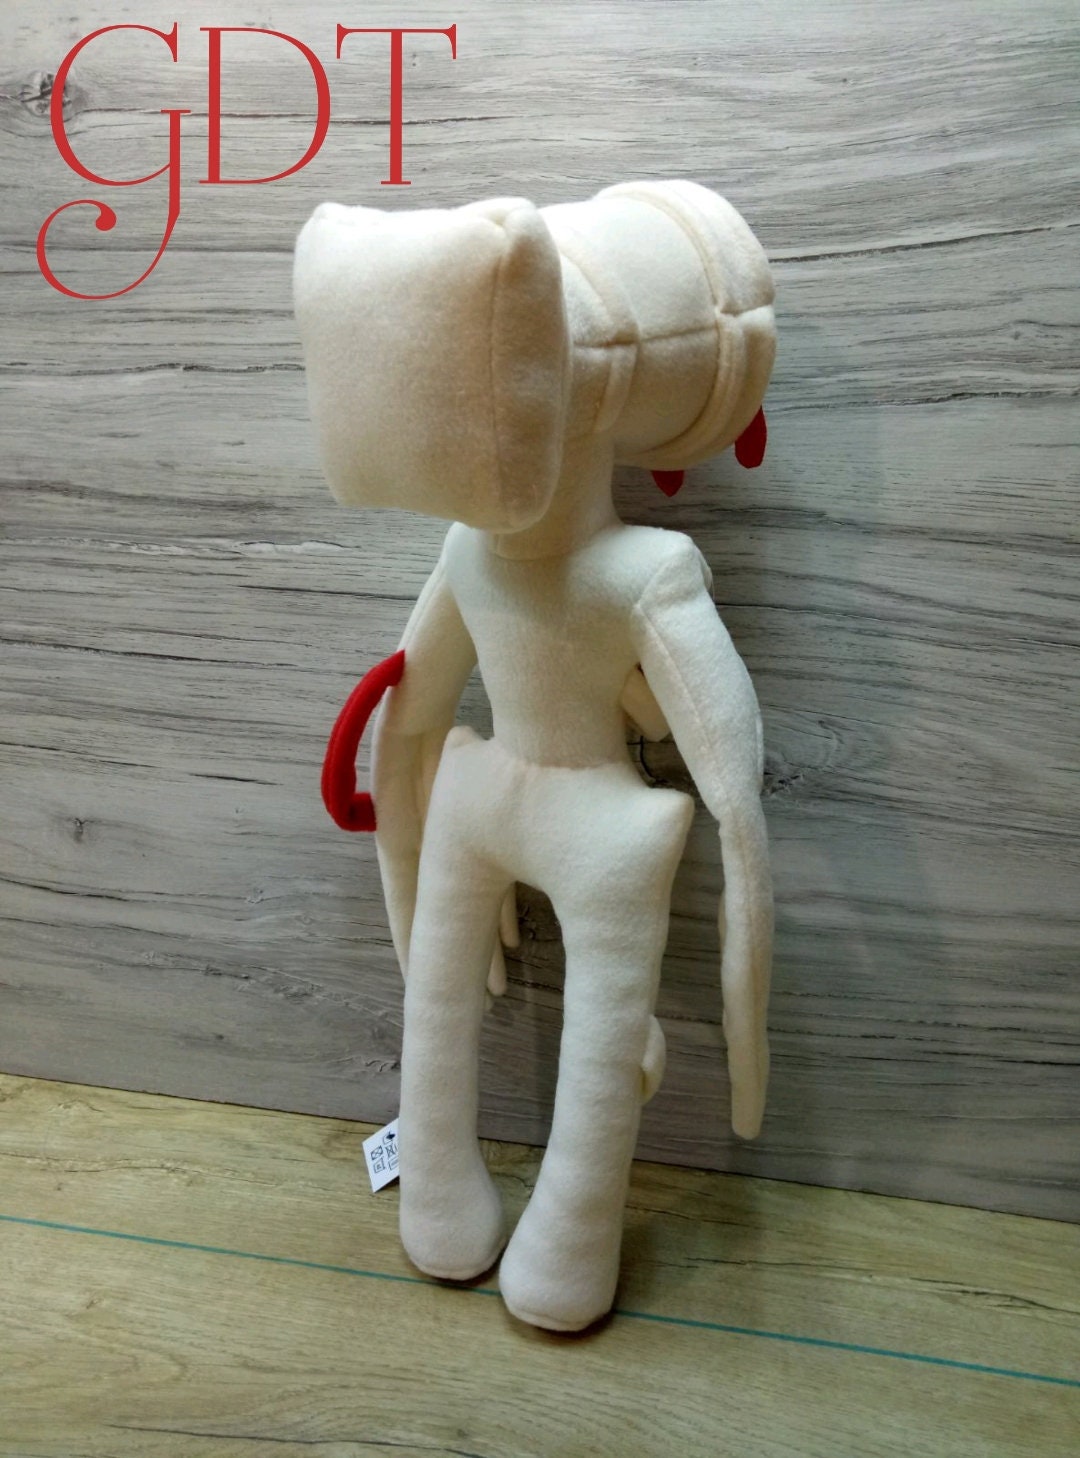 Siren Head Plush Unofficial Indie Video Game Pillow -  Portugal